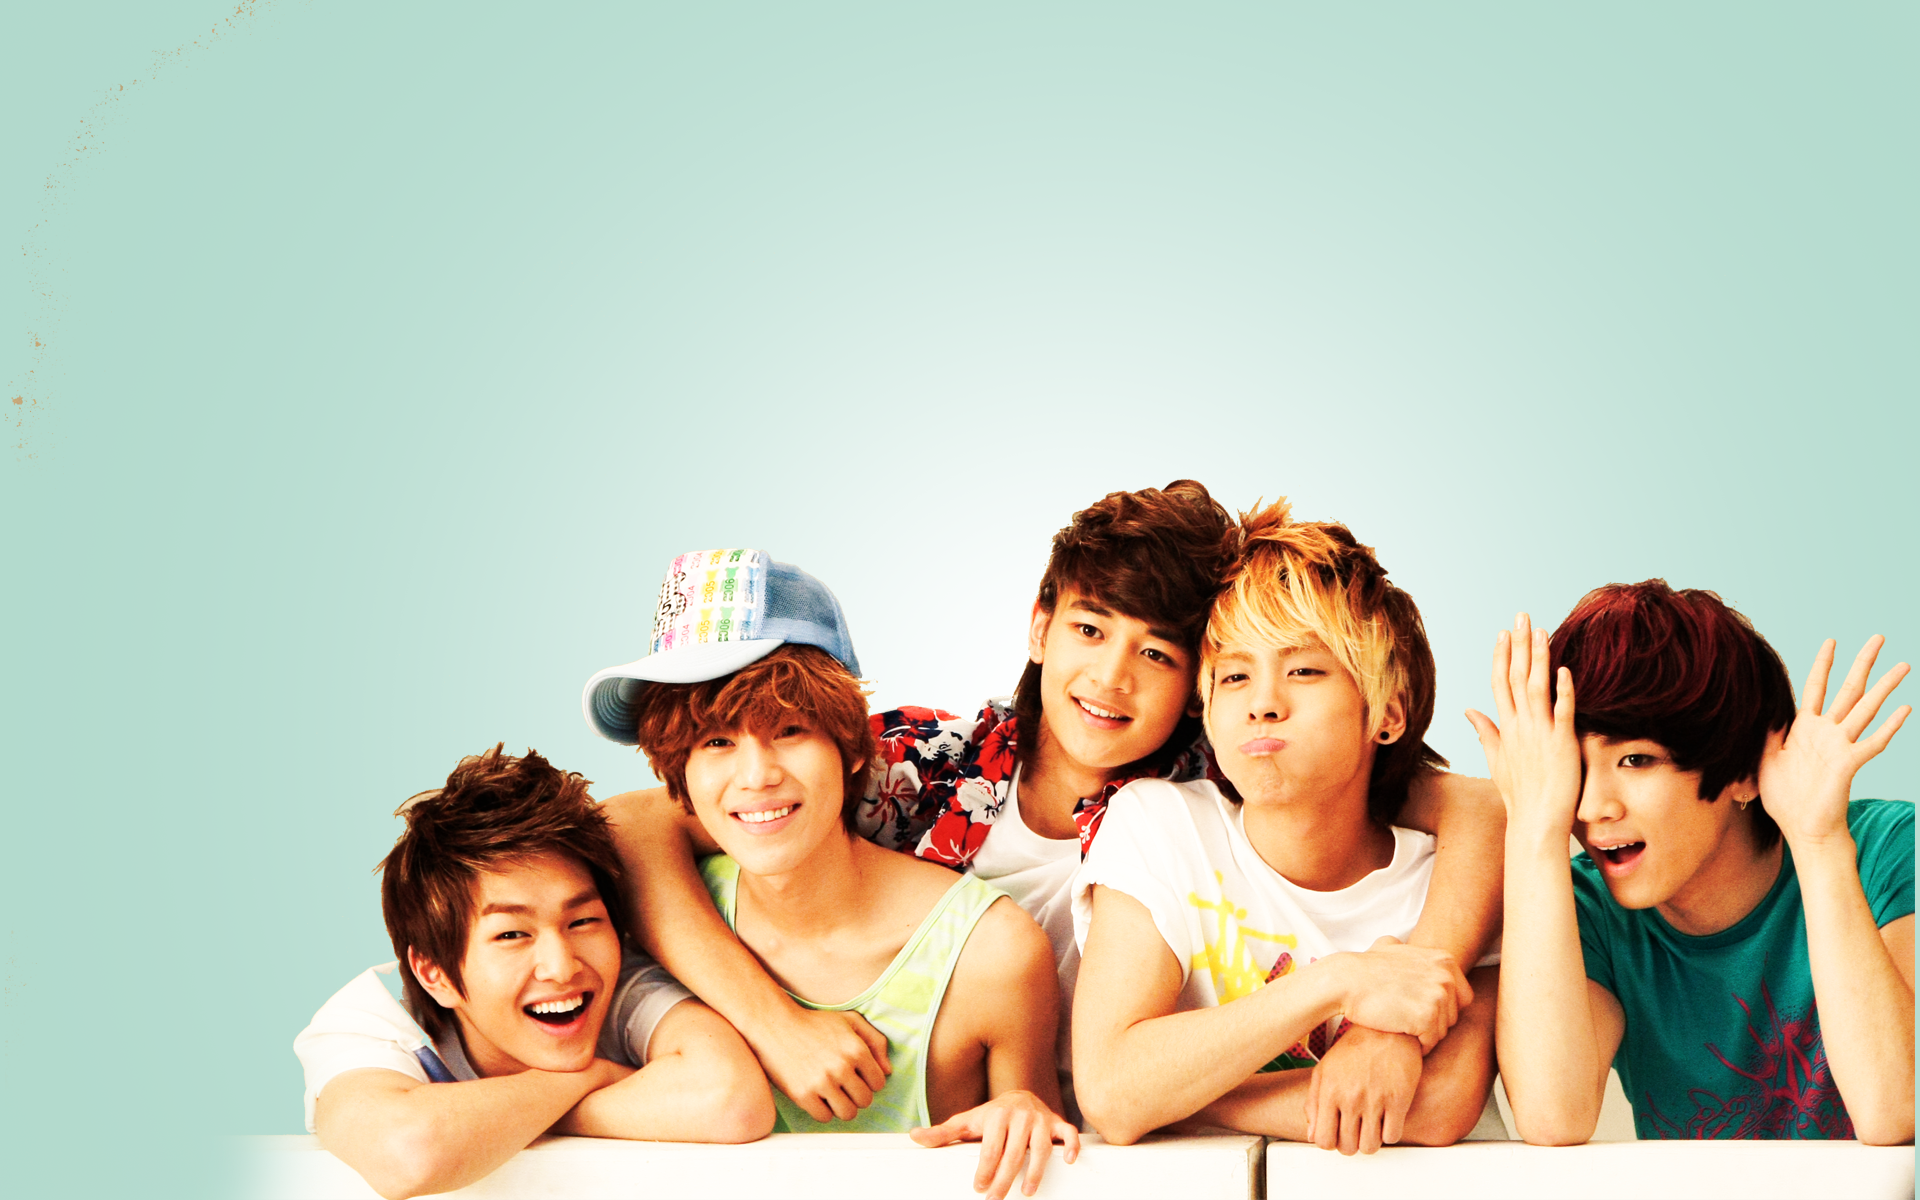 Shinee Image HD Wallpaper And Background Photos